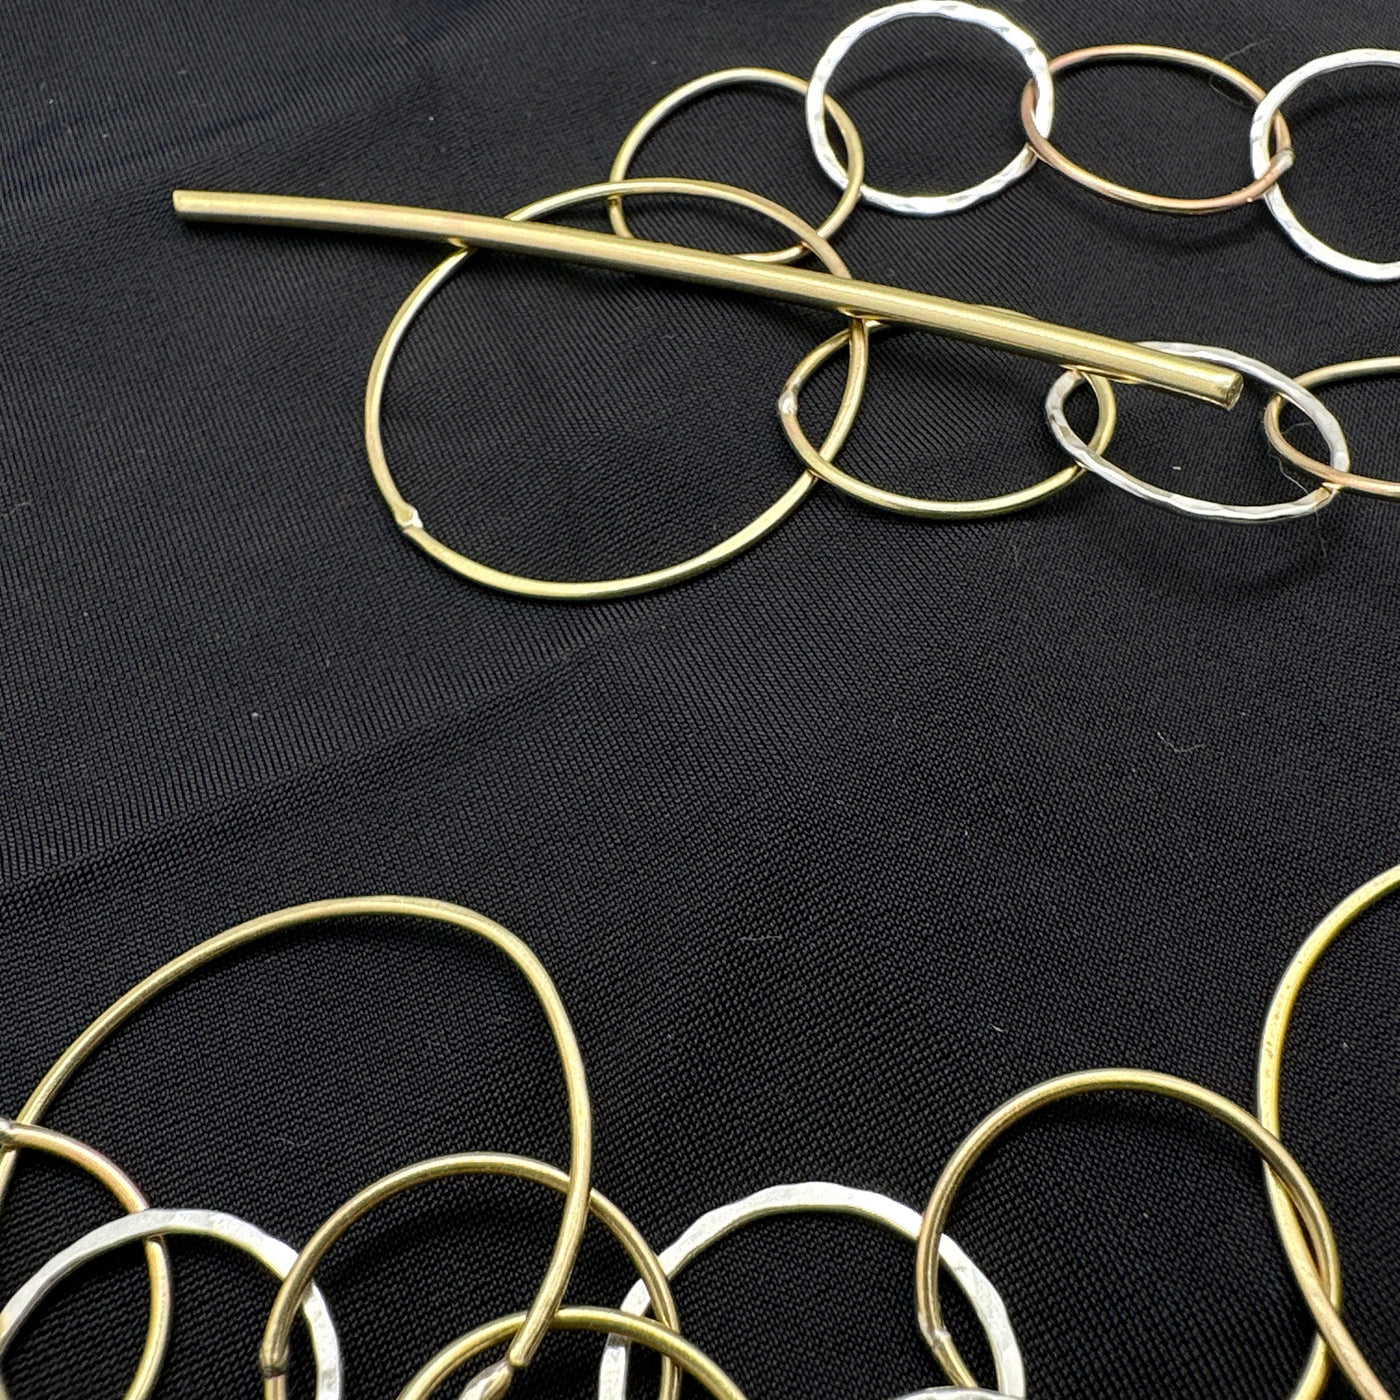 Silver and brass handmade circle chains with linear close